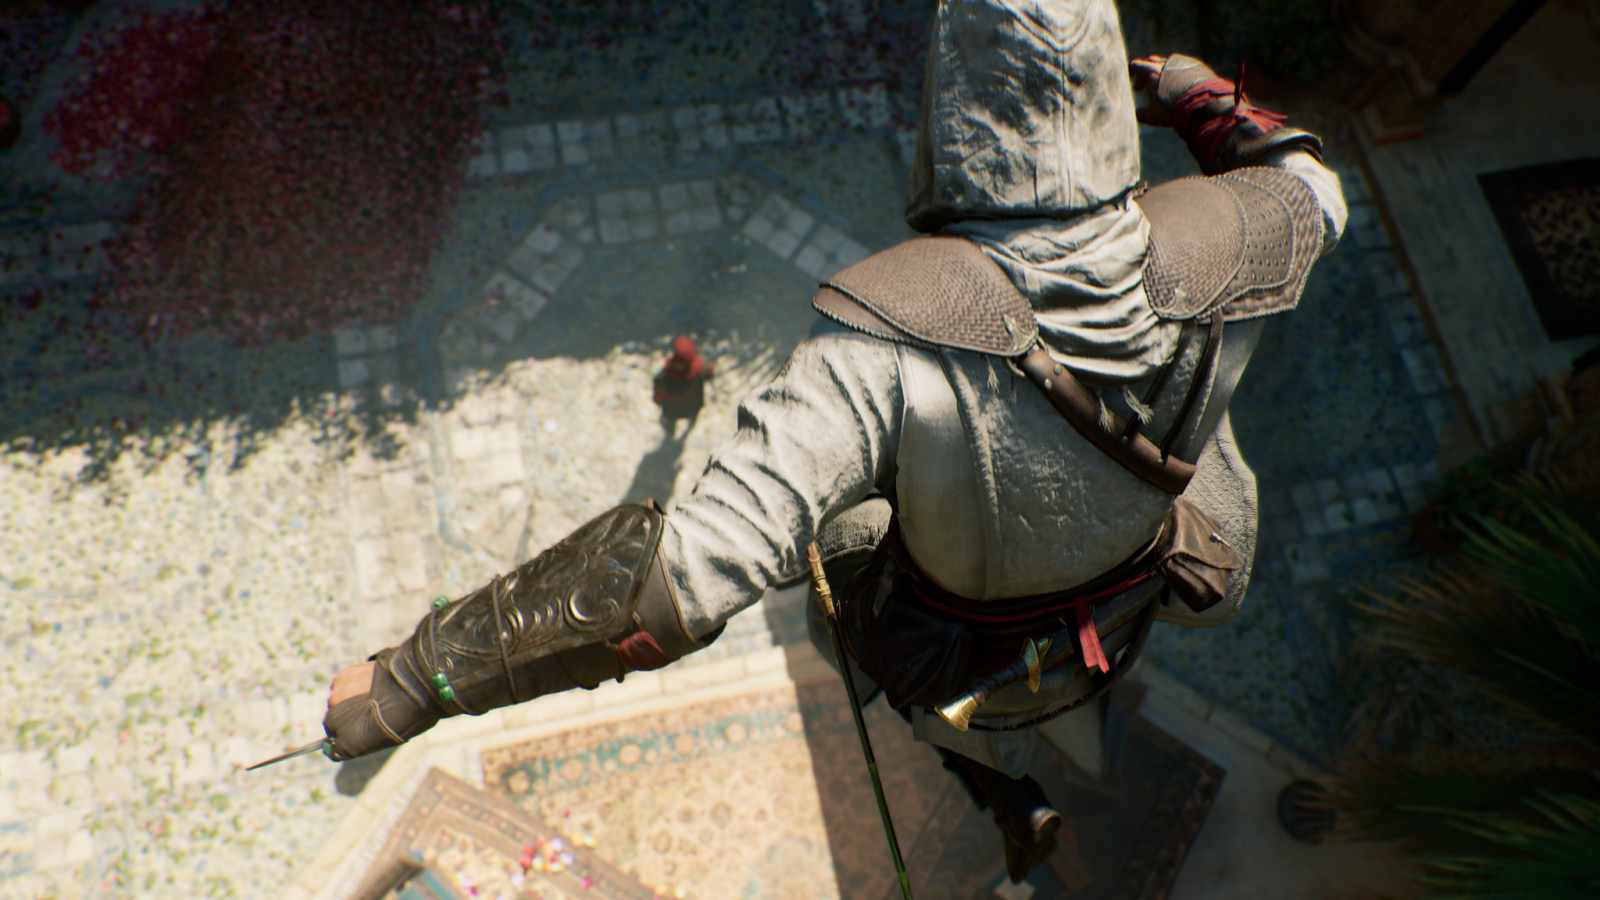 Assassin's Creed Unity System Requirements